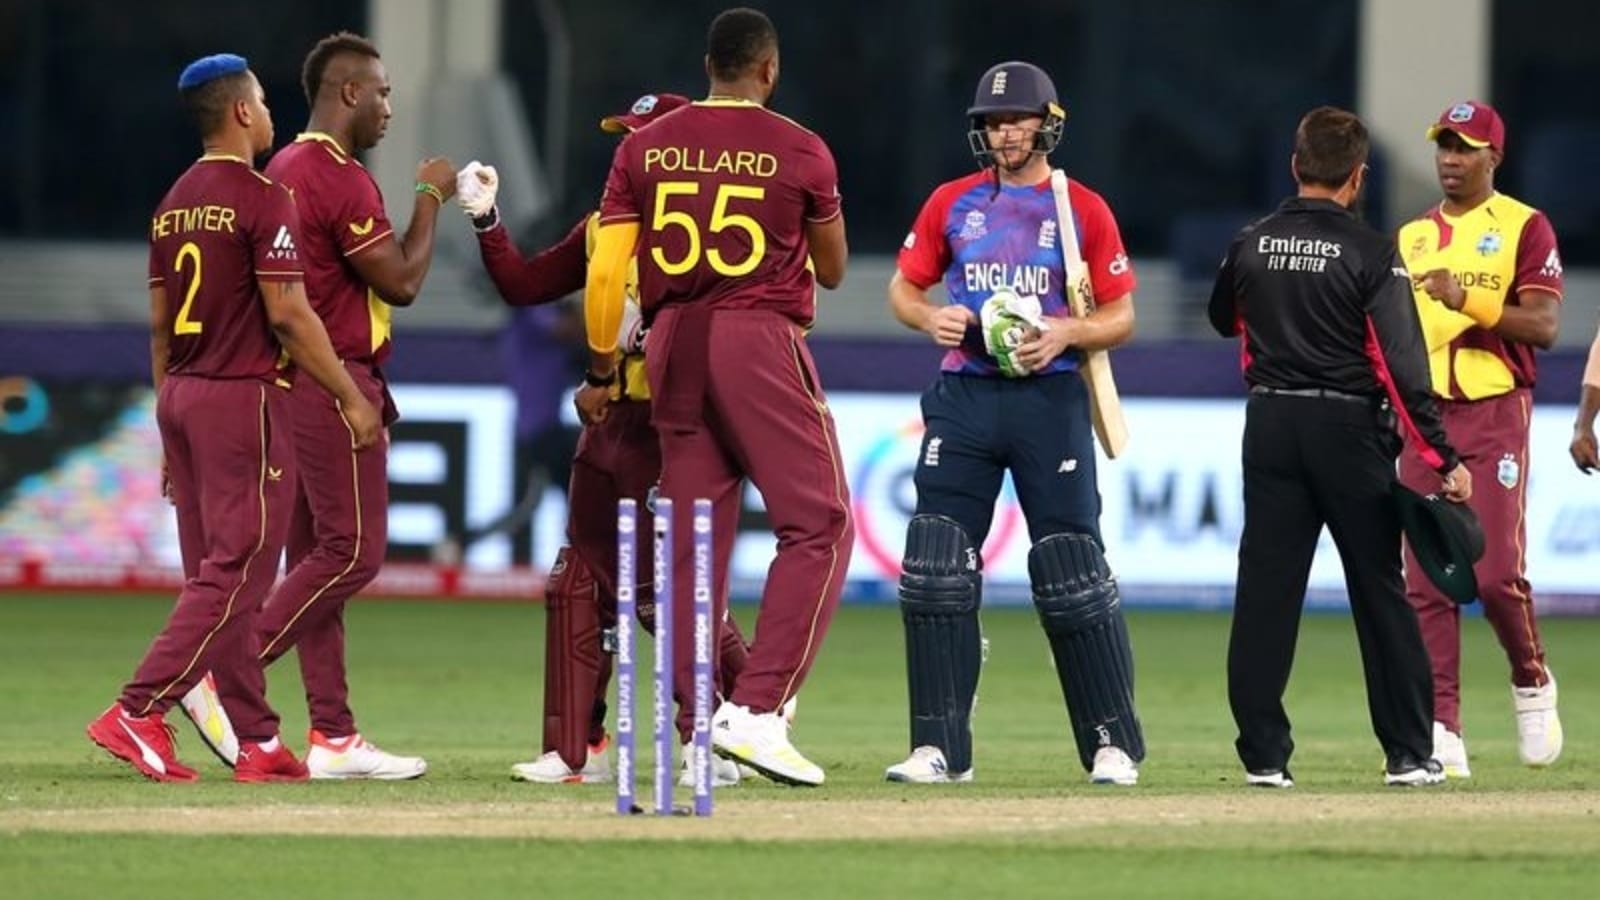 England vs West Indies highlights T20 World Cup 2021 England beat West Indies by 6 wickets Hindustan Times